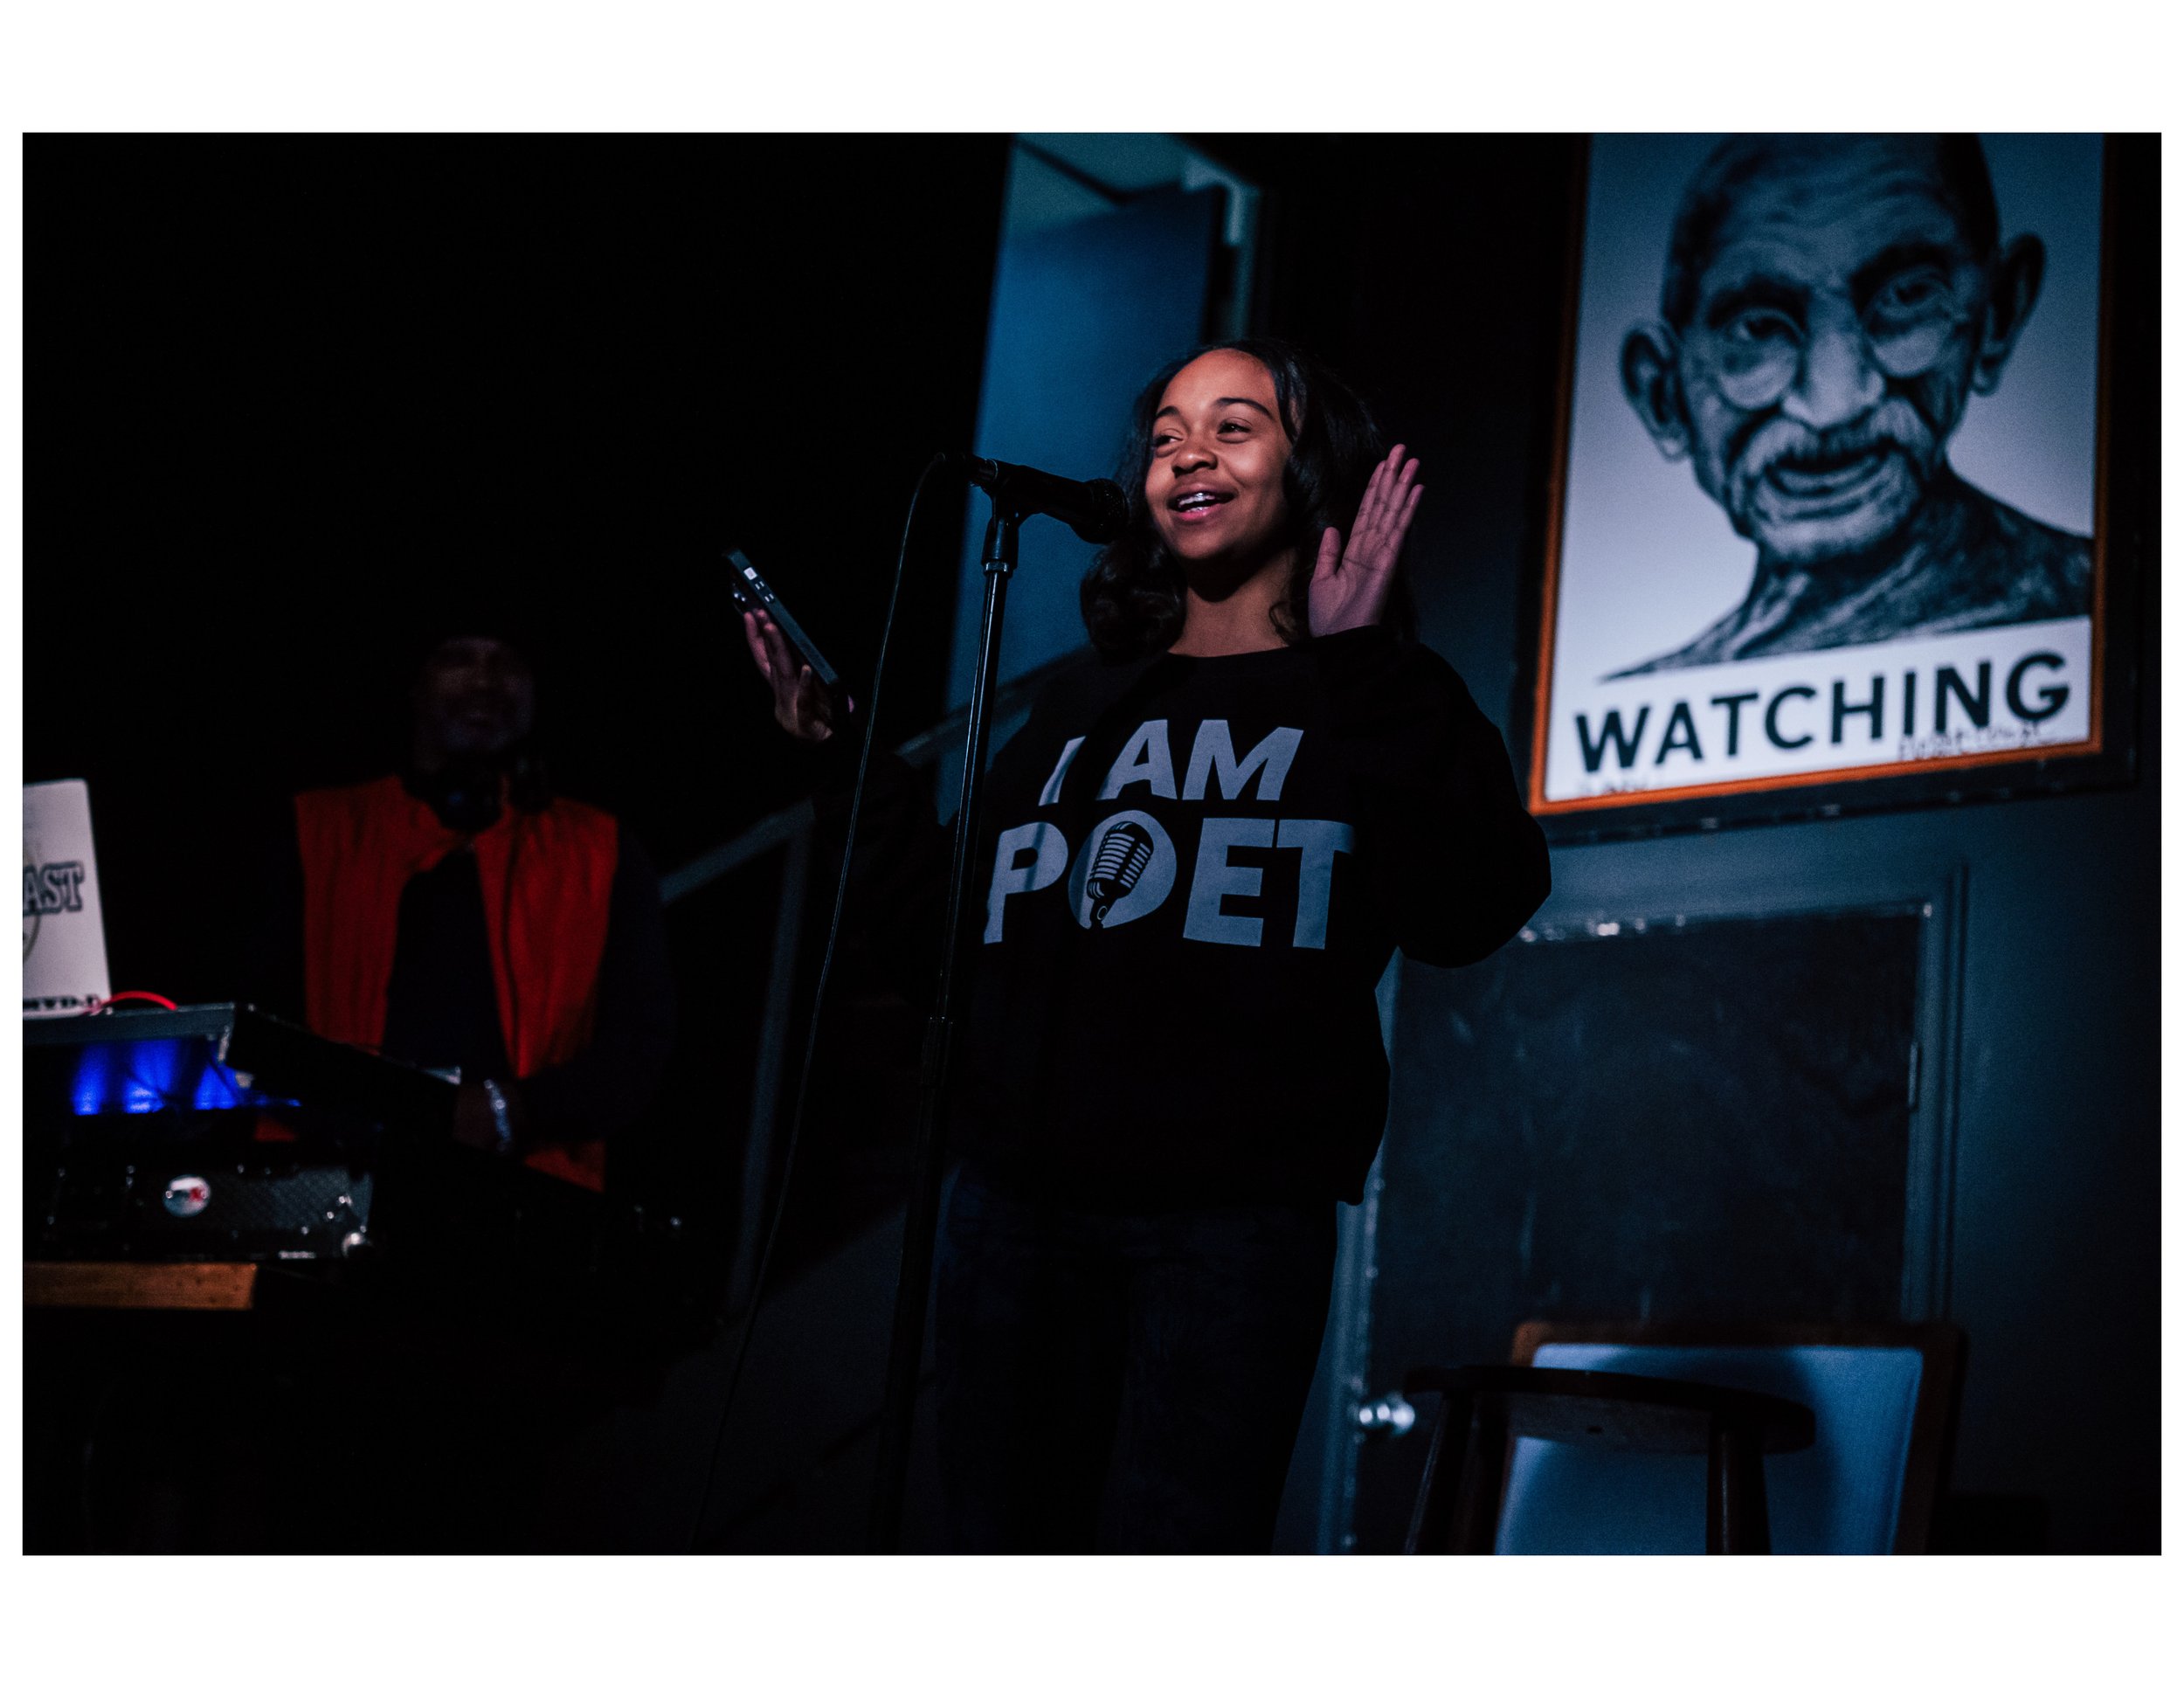   Youth Poet Lemonade Dream performs an original poem at an open mic event hosted by Words Beats &amp; Life Inc. at Busboys and Poets in Washington, DC. Photographer/Victoria Ford  